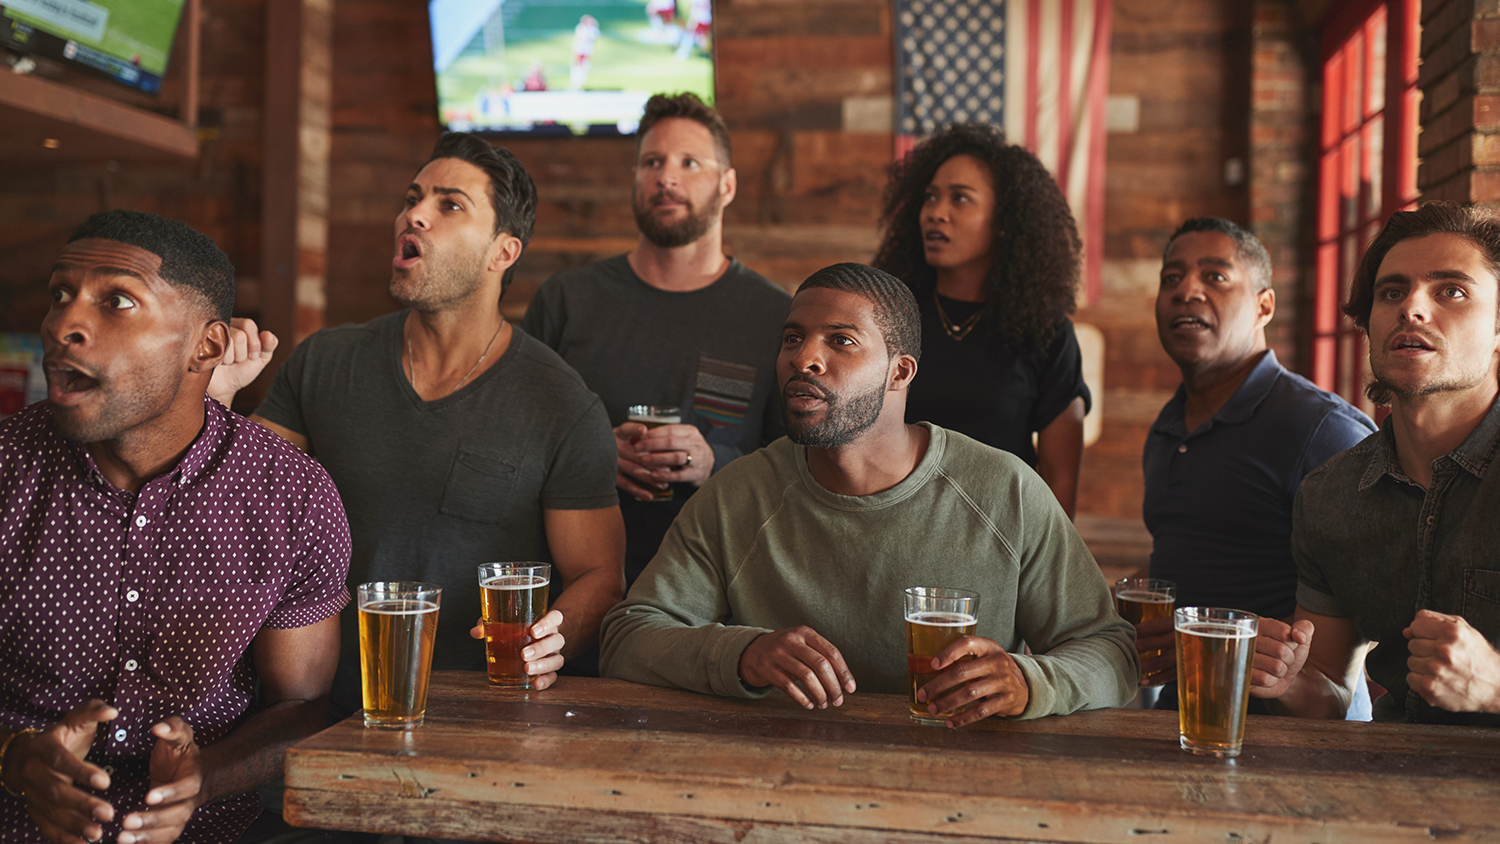 Group of sports fans watching a game excitedly at a sports bar